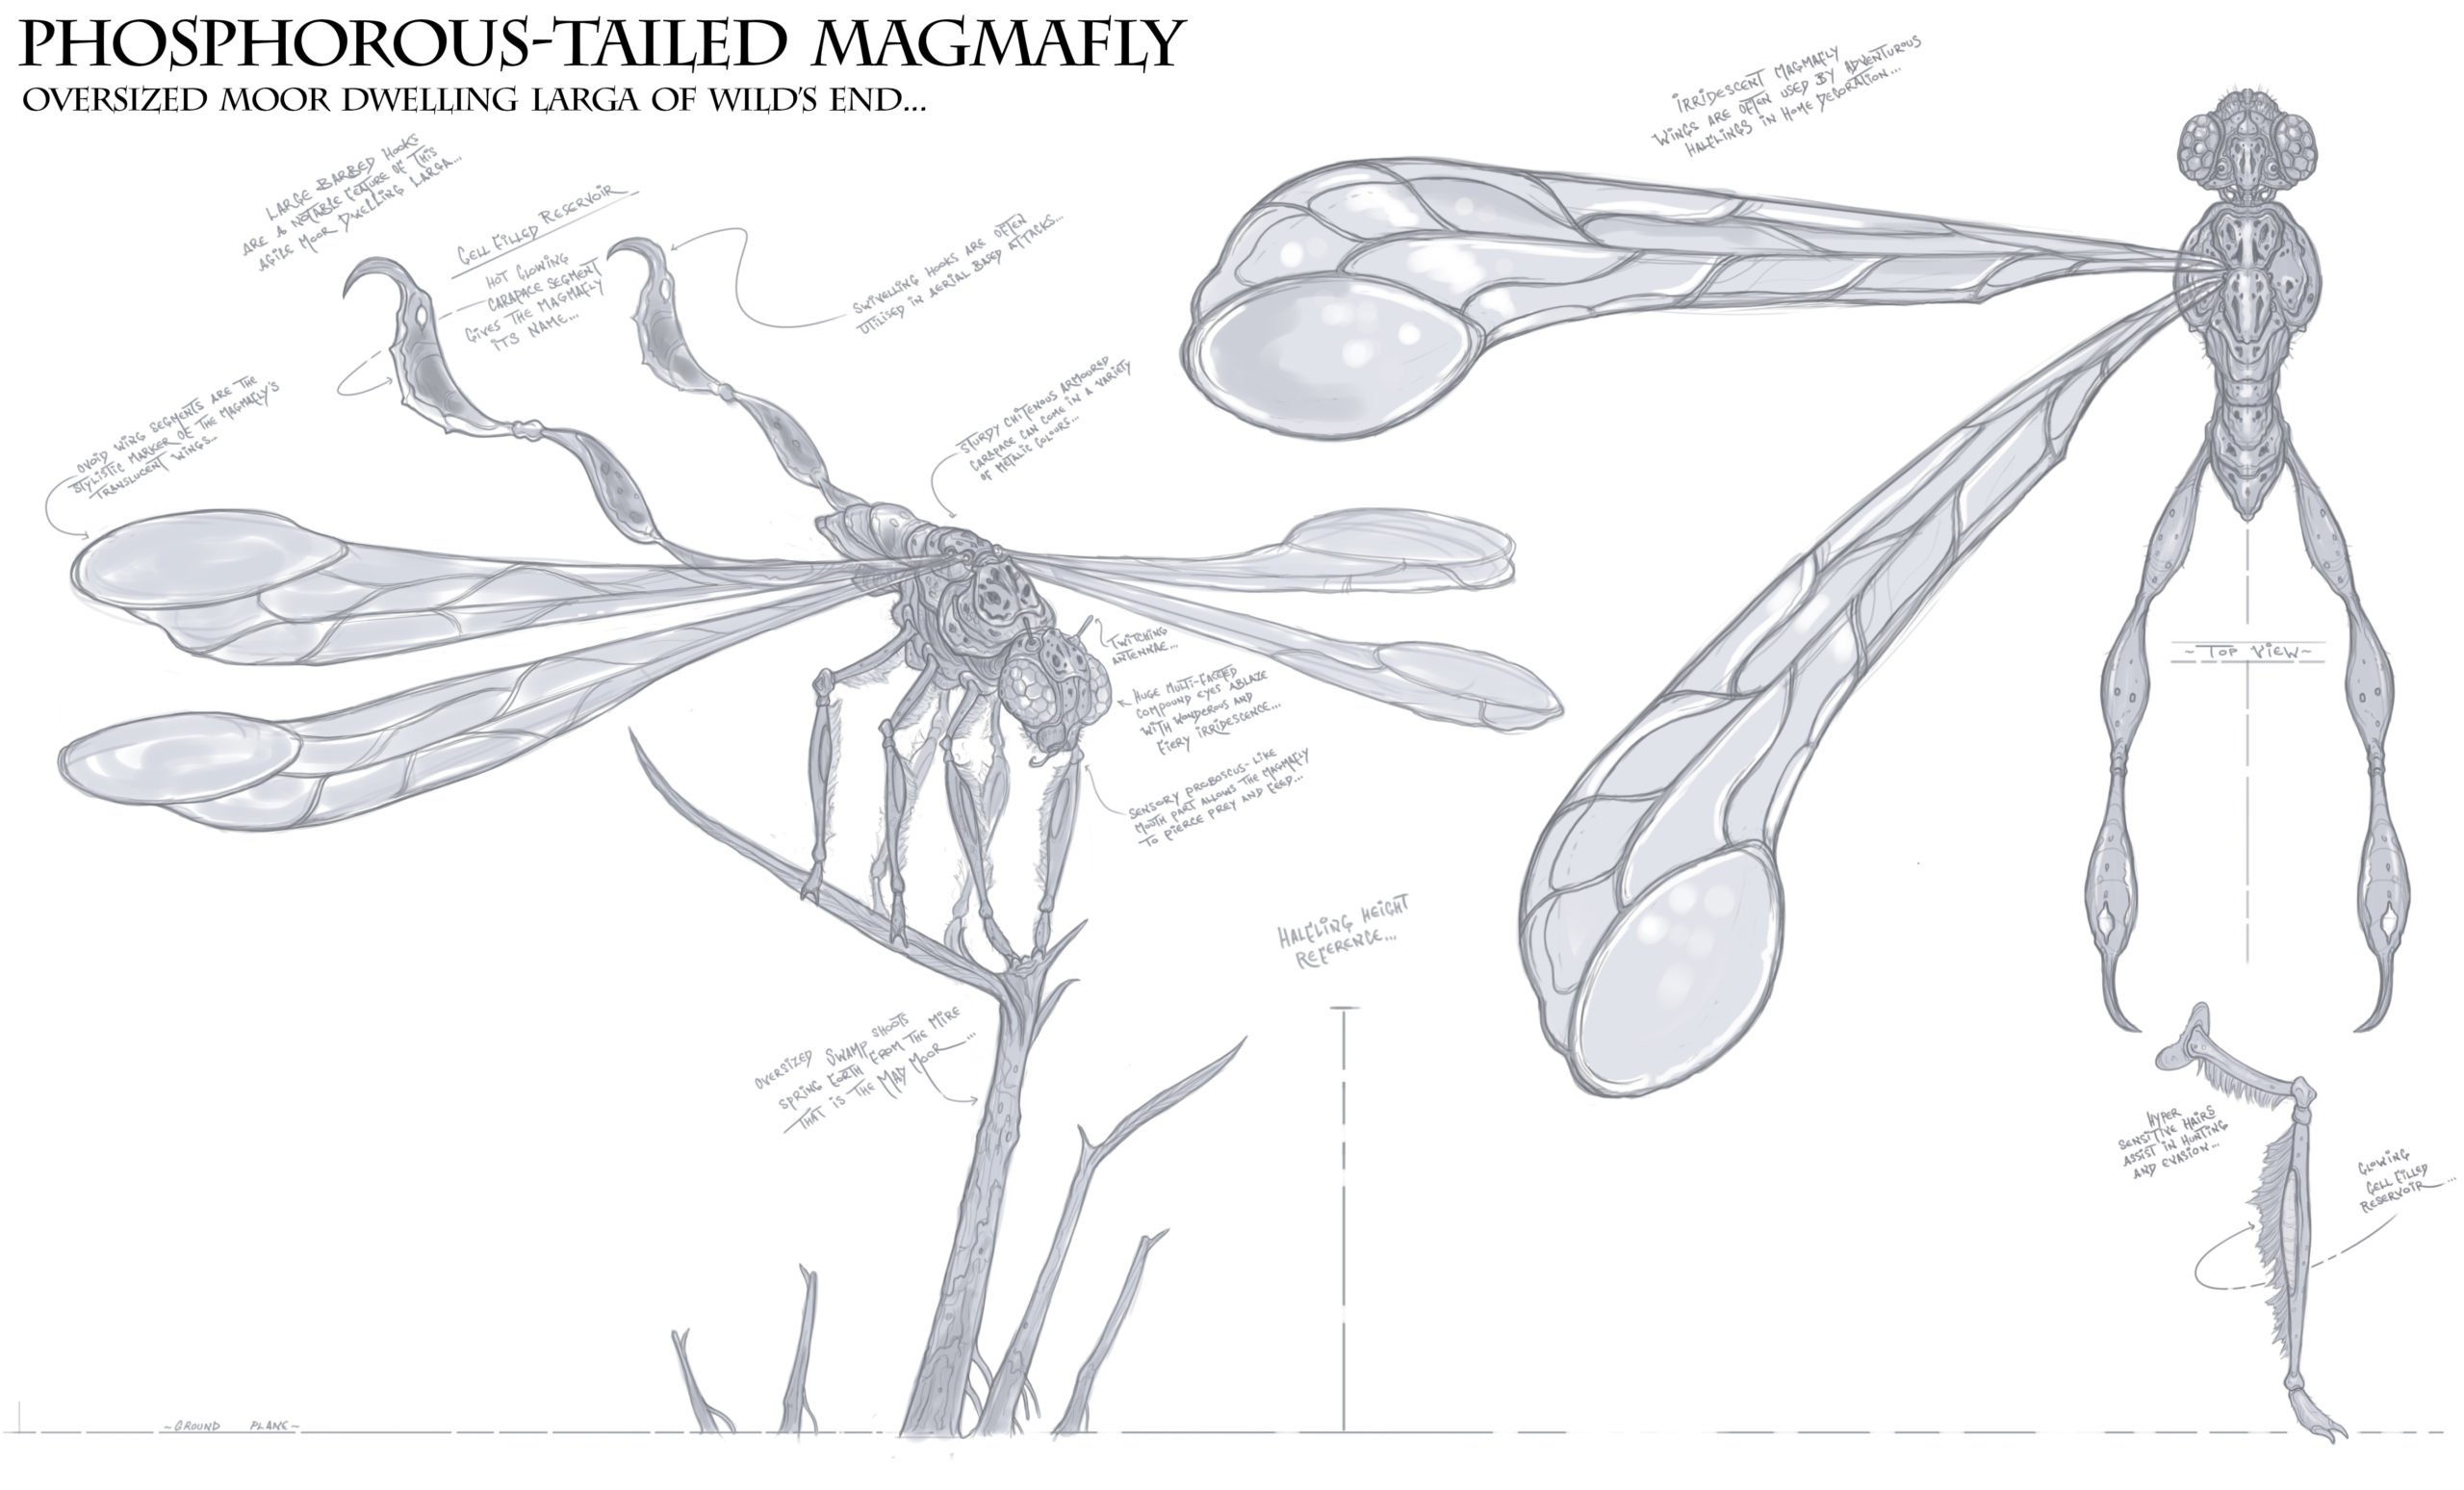 2021-Sep 16: concept art of a Phosphorous-Tailed Magmafly NPC